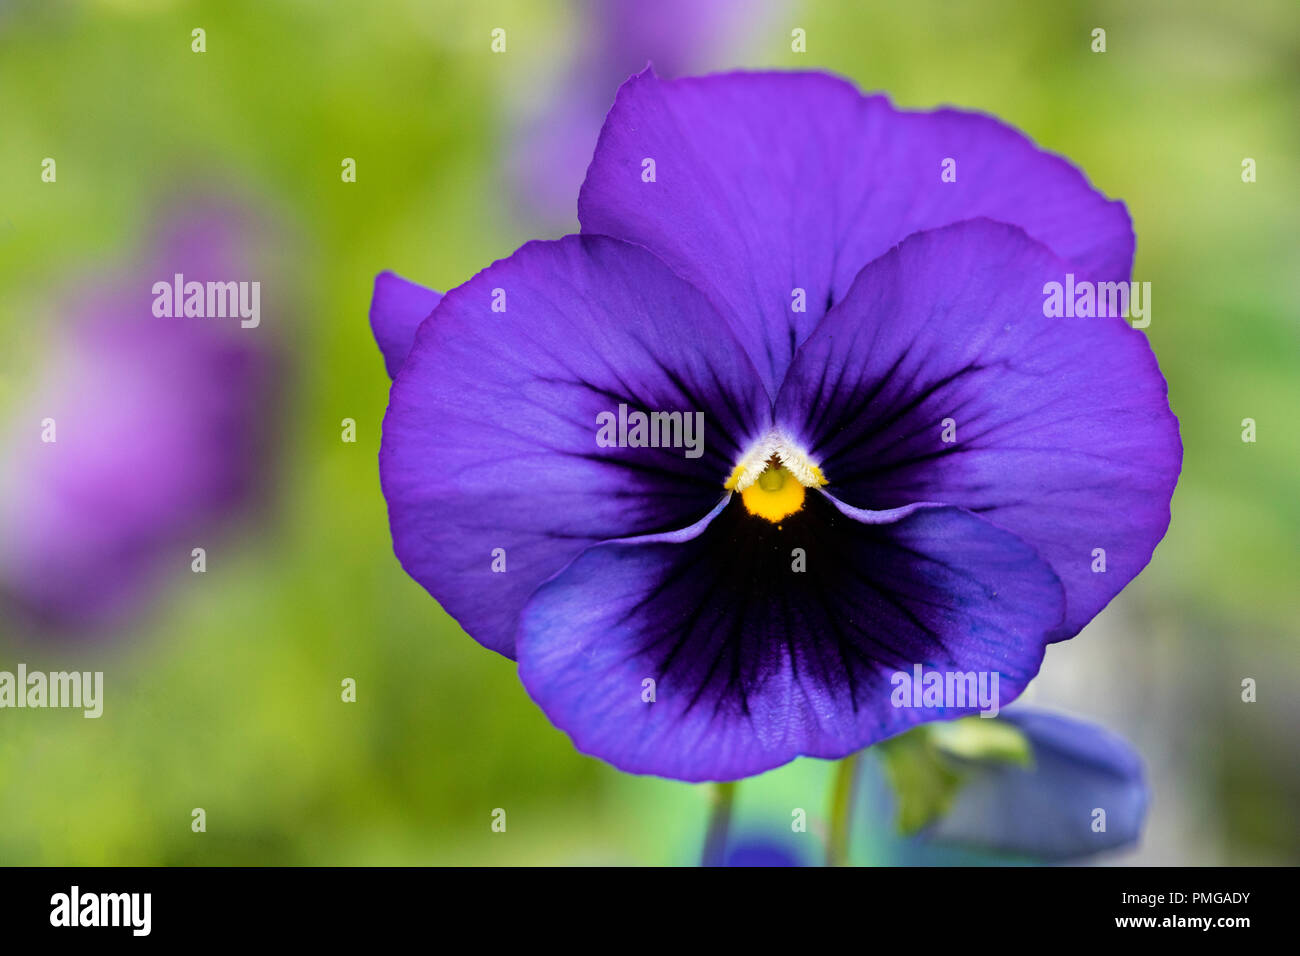 Close up of Blue Blotch Pansy against a blurred background Stock Photo